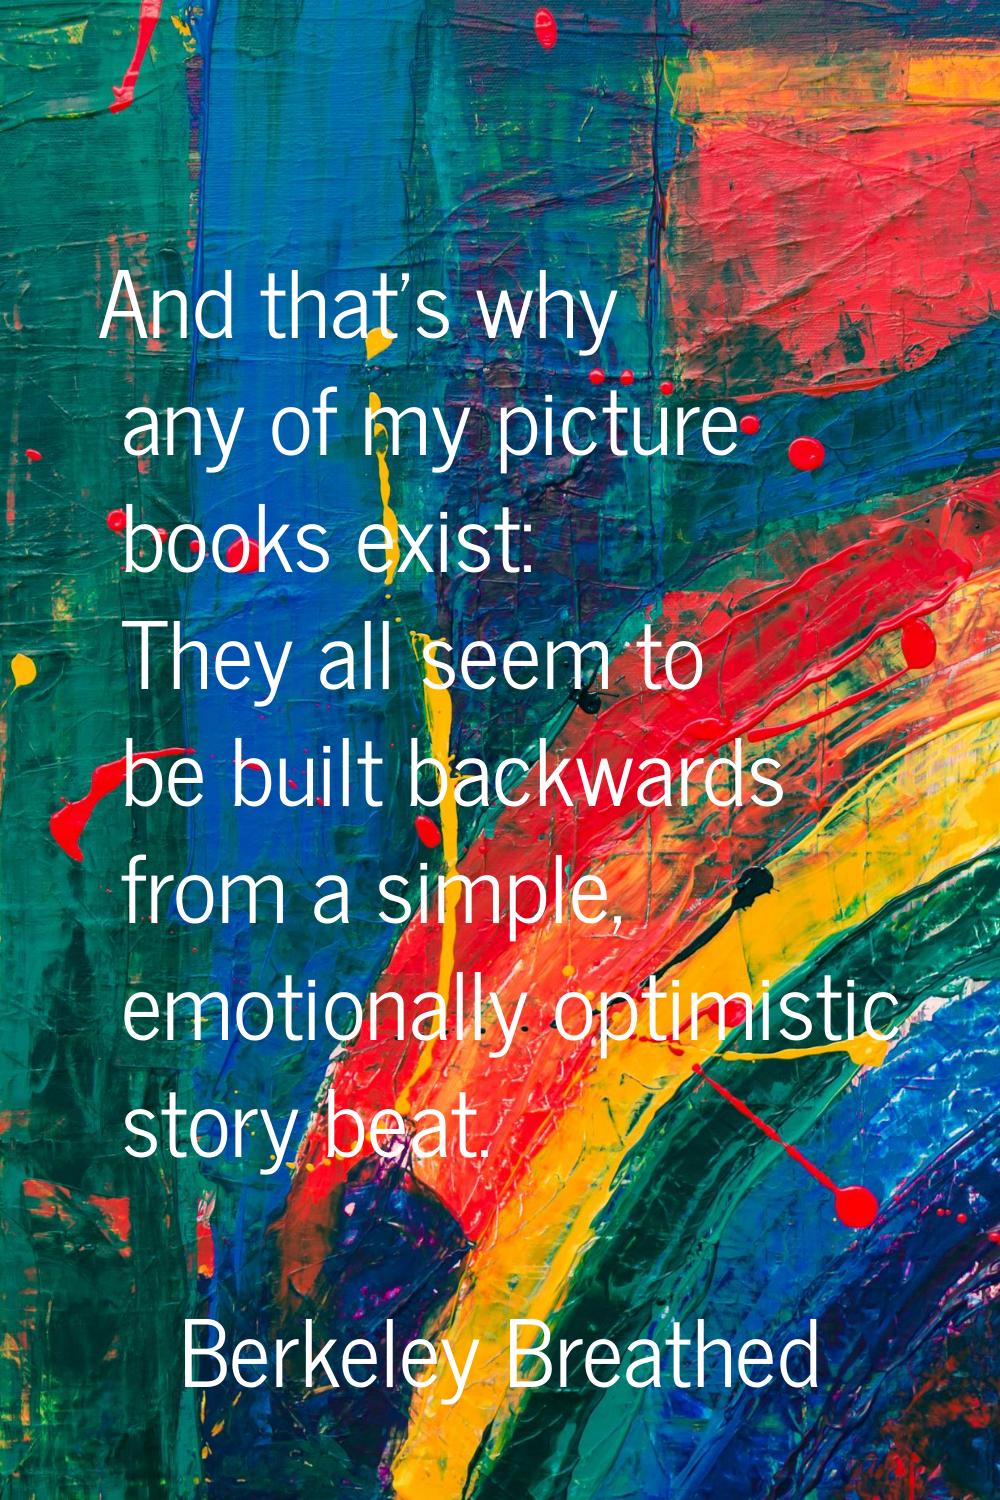 And that's why any of my picture books exist: They all seem to be built backwards from a simple, em